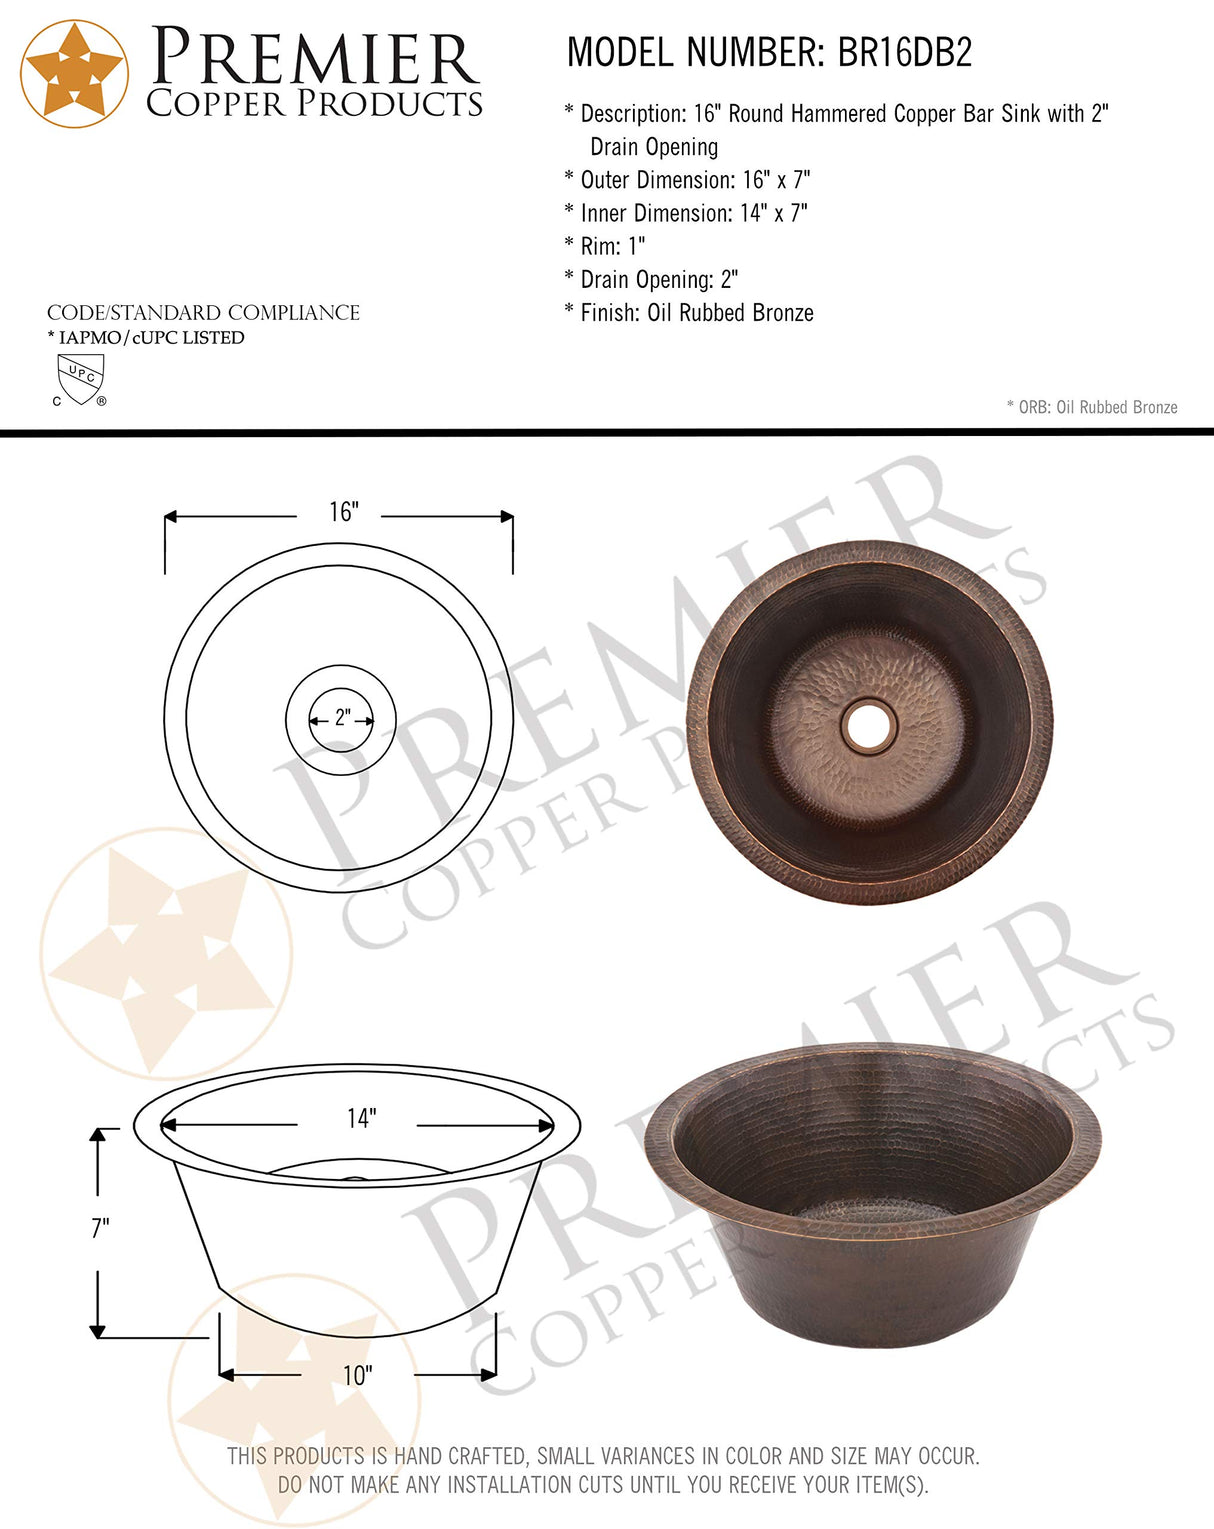 Premier Copper Products BR16DB2 16-Inch Universal Round Hammered Copper Bar Sink with 2-Inch Drain Size, Oil Rubbed Bronze